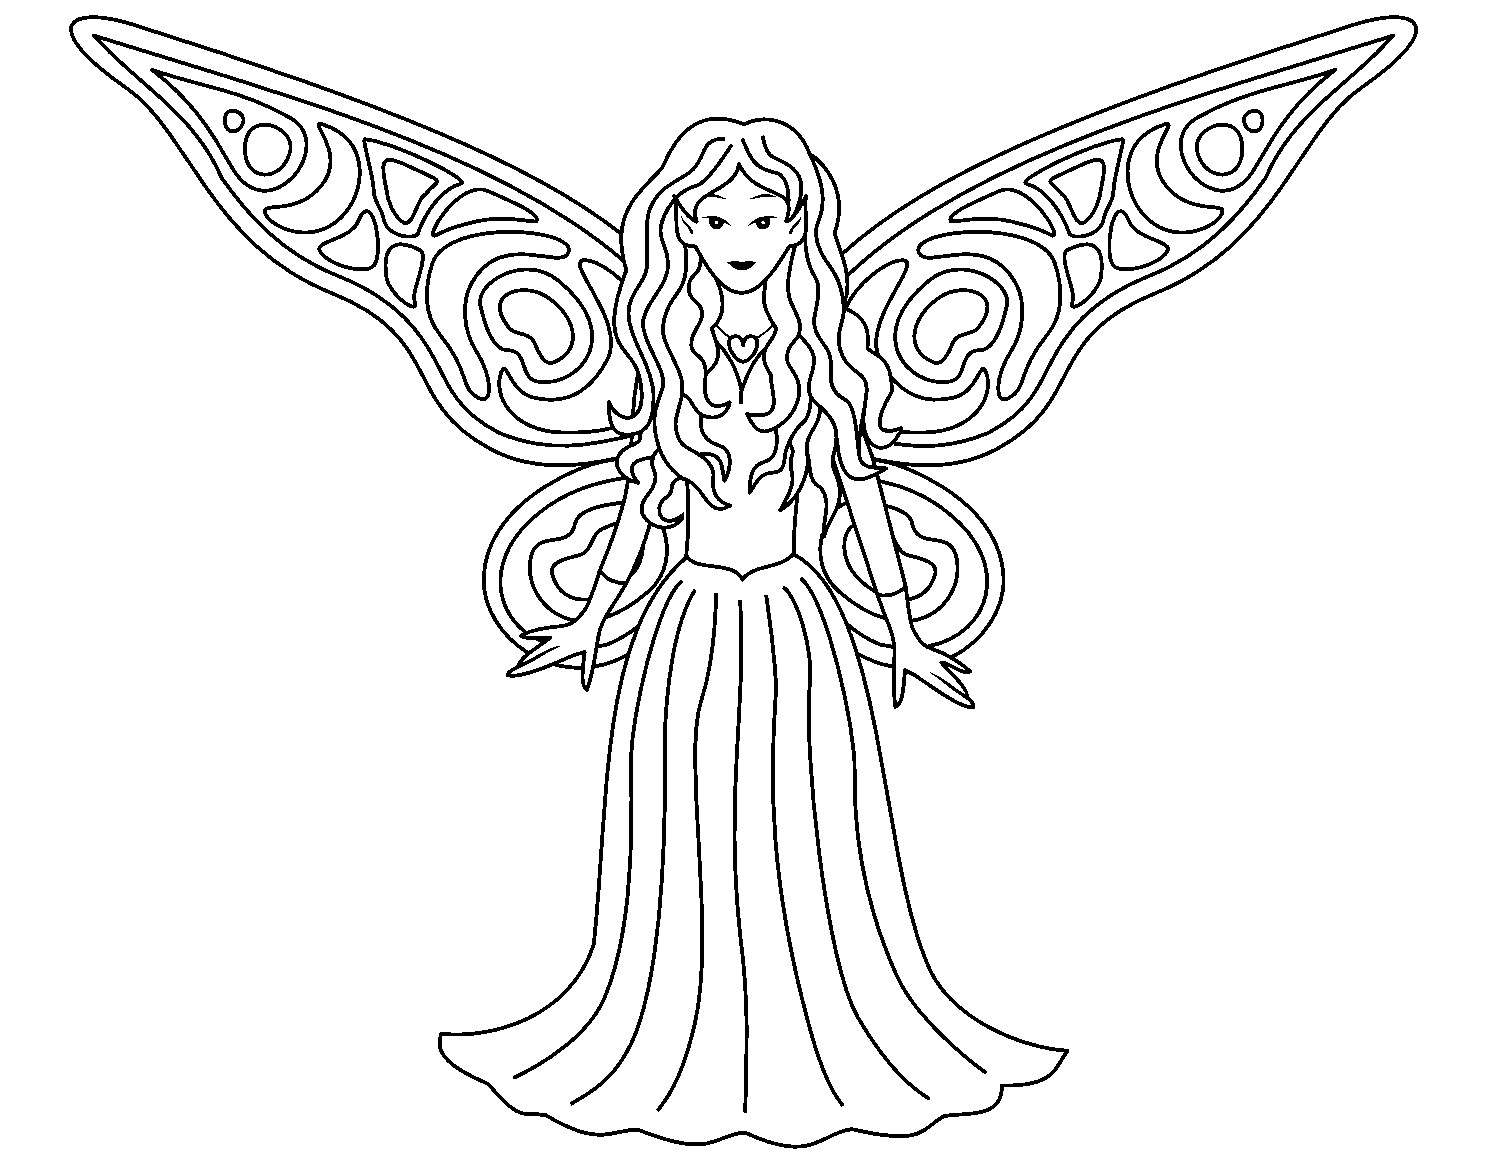 Free Coloring Pages Of Fairies Coloring Coloring Pages Fairies Disney Silvermist Free Fairy Books